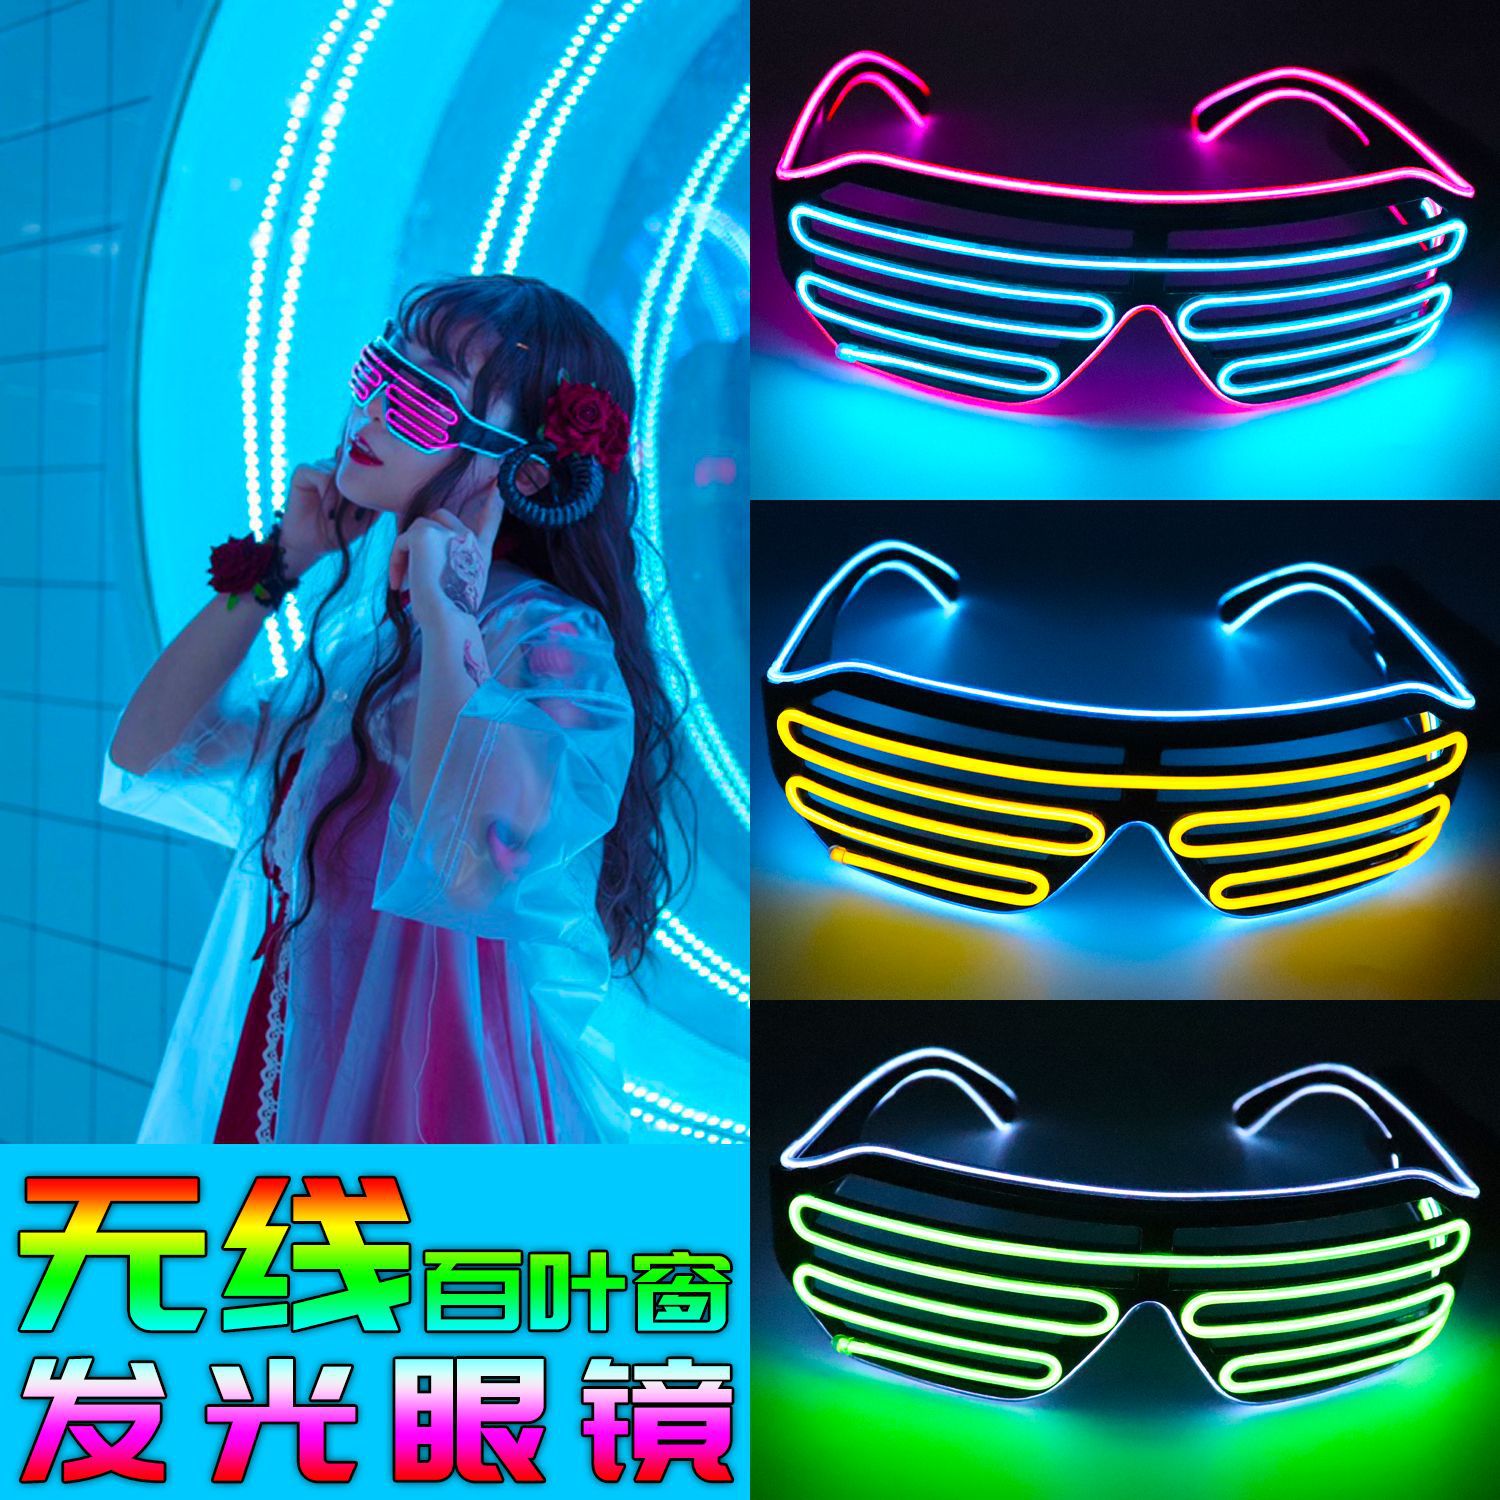 factory supply and marketing party glasses wireless led luminous shutter creative new strange atmosphere layout stall props